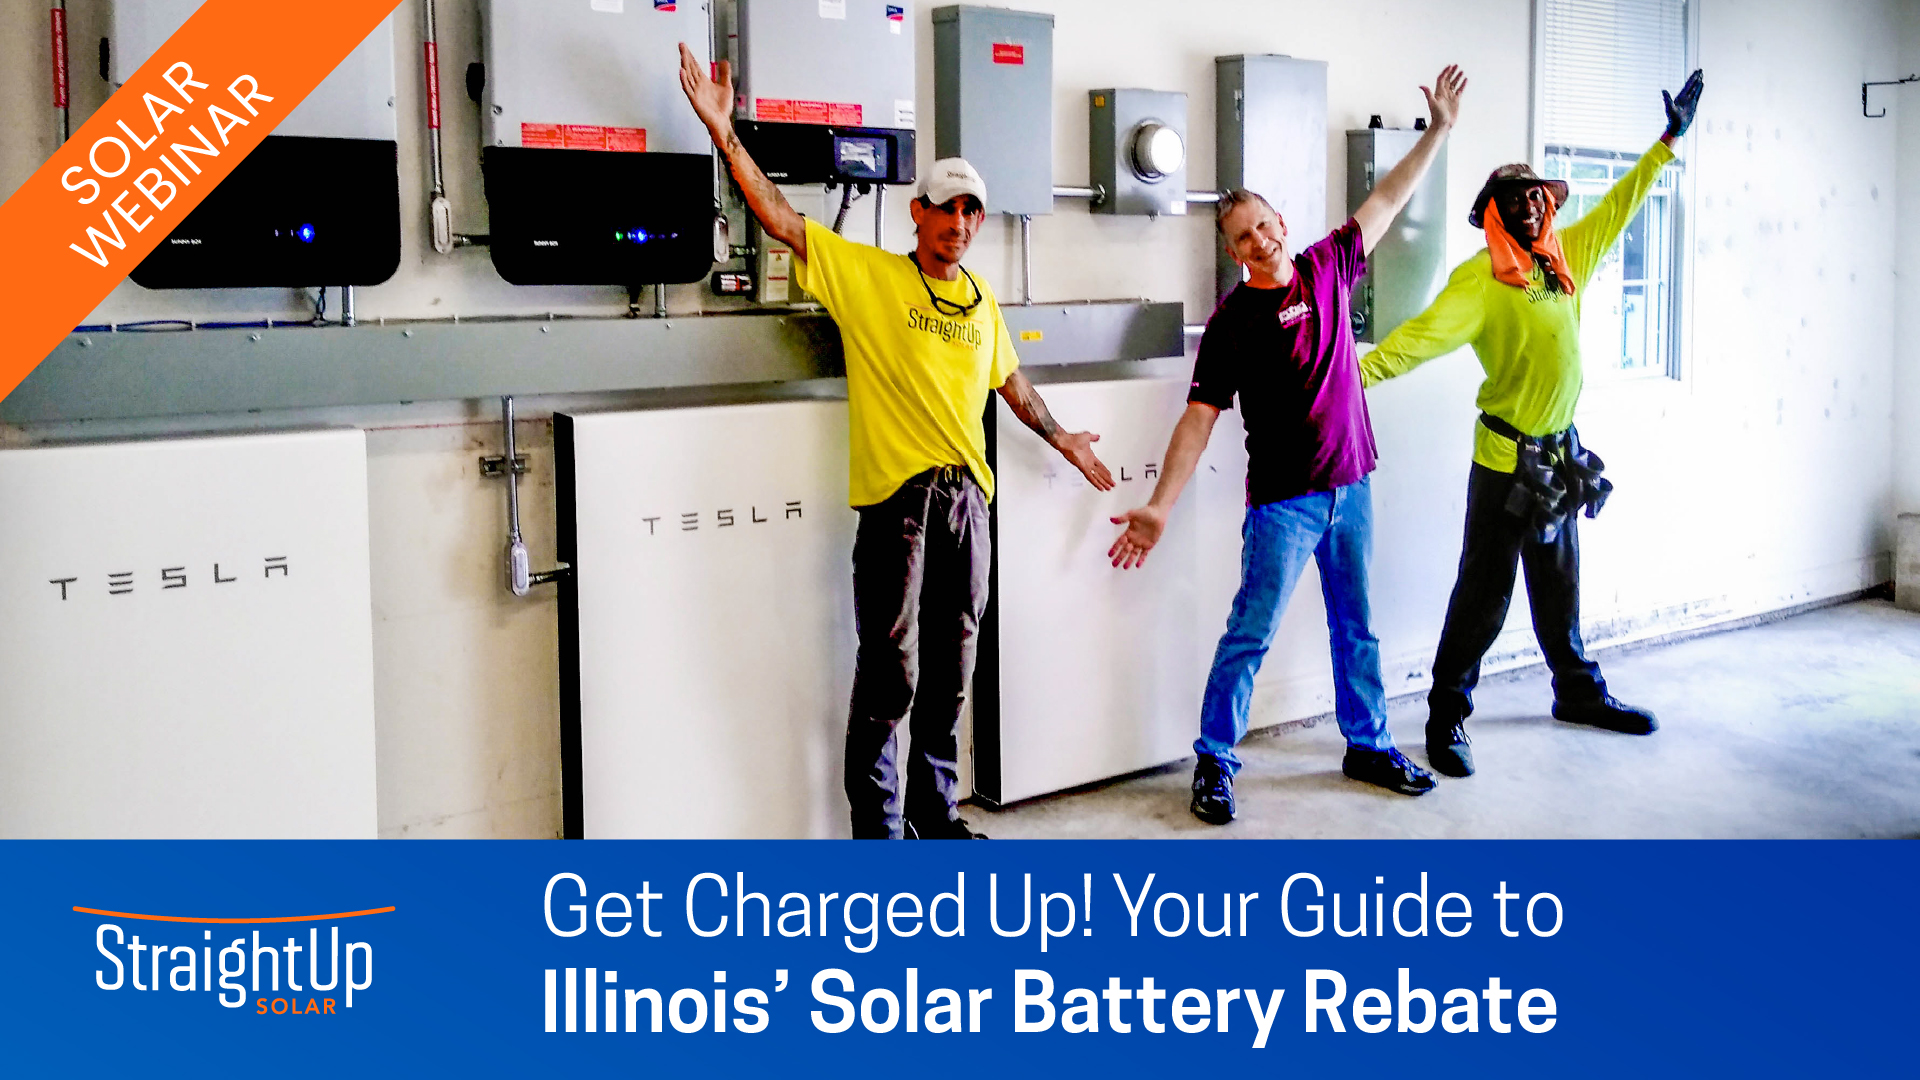 webinar-get-charged-up-your-guide-to-illinois-solar-battery-rebate